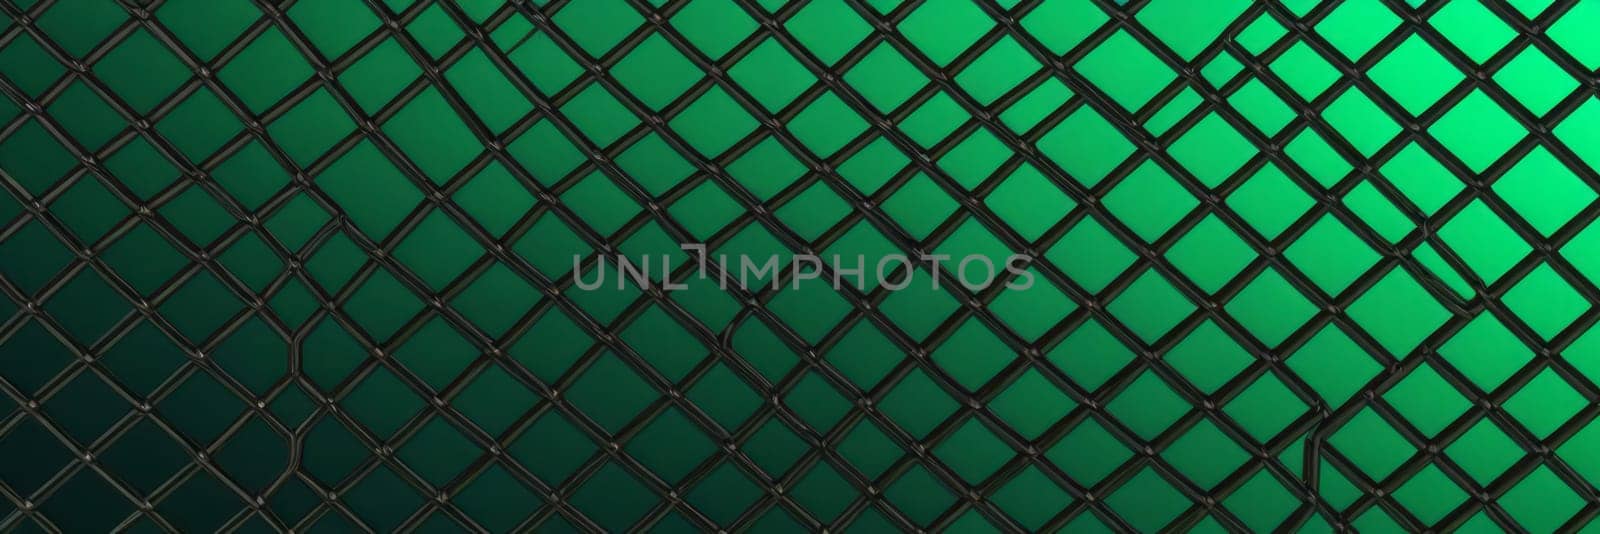 Lattice Shapes in Black and Forest green by nkotlyar